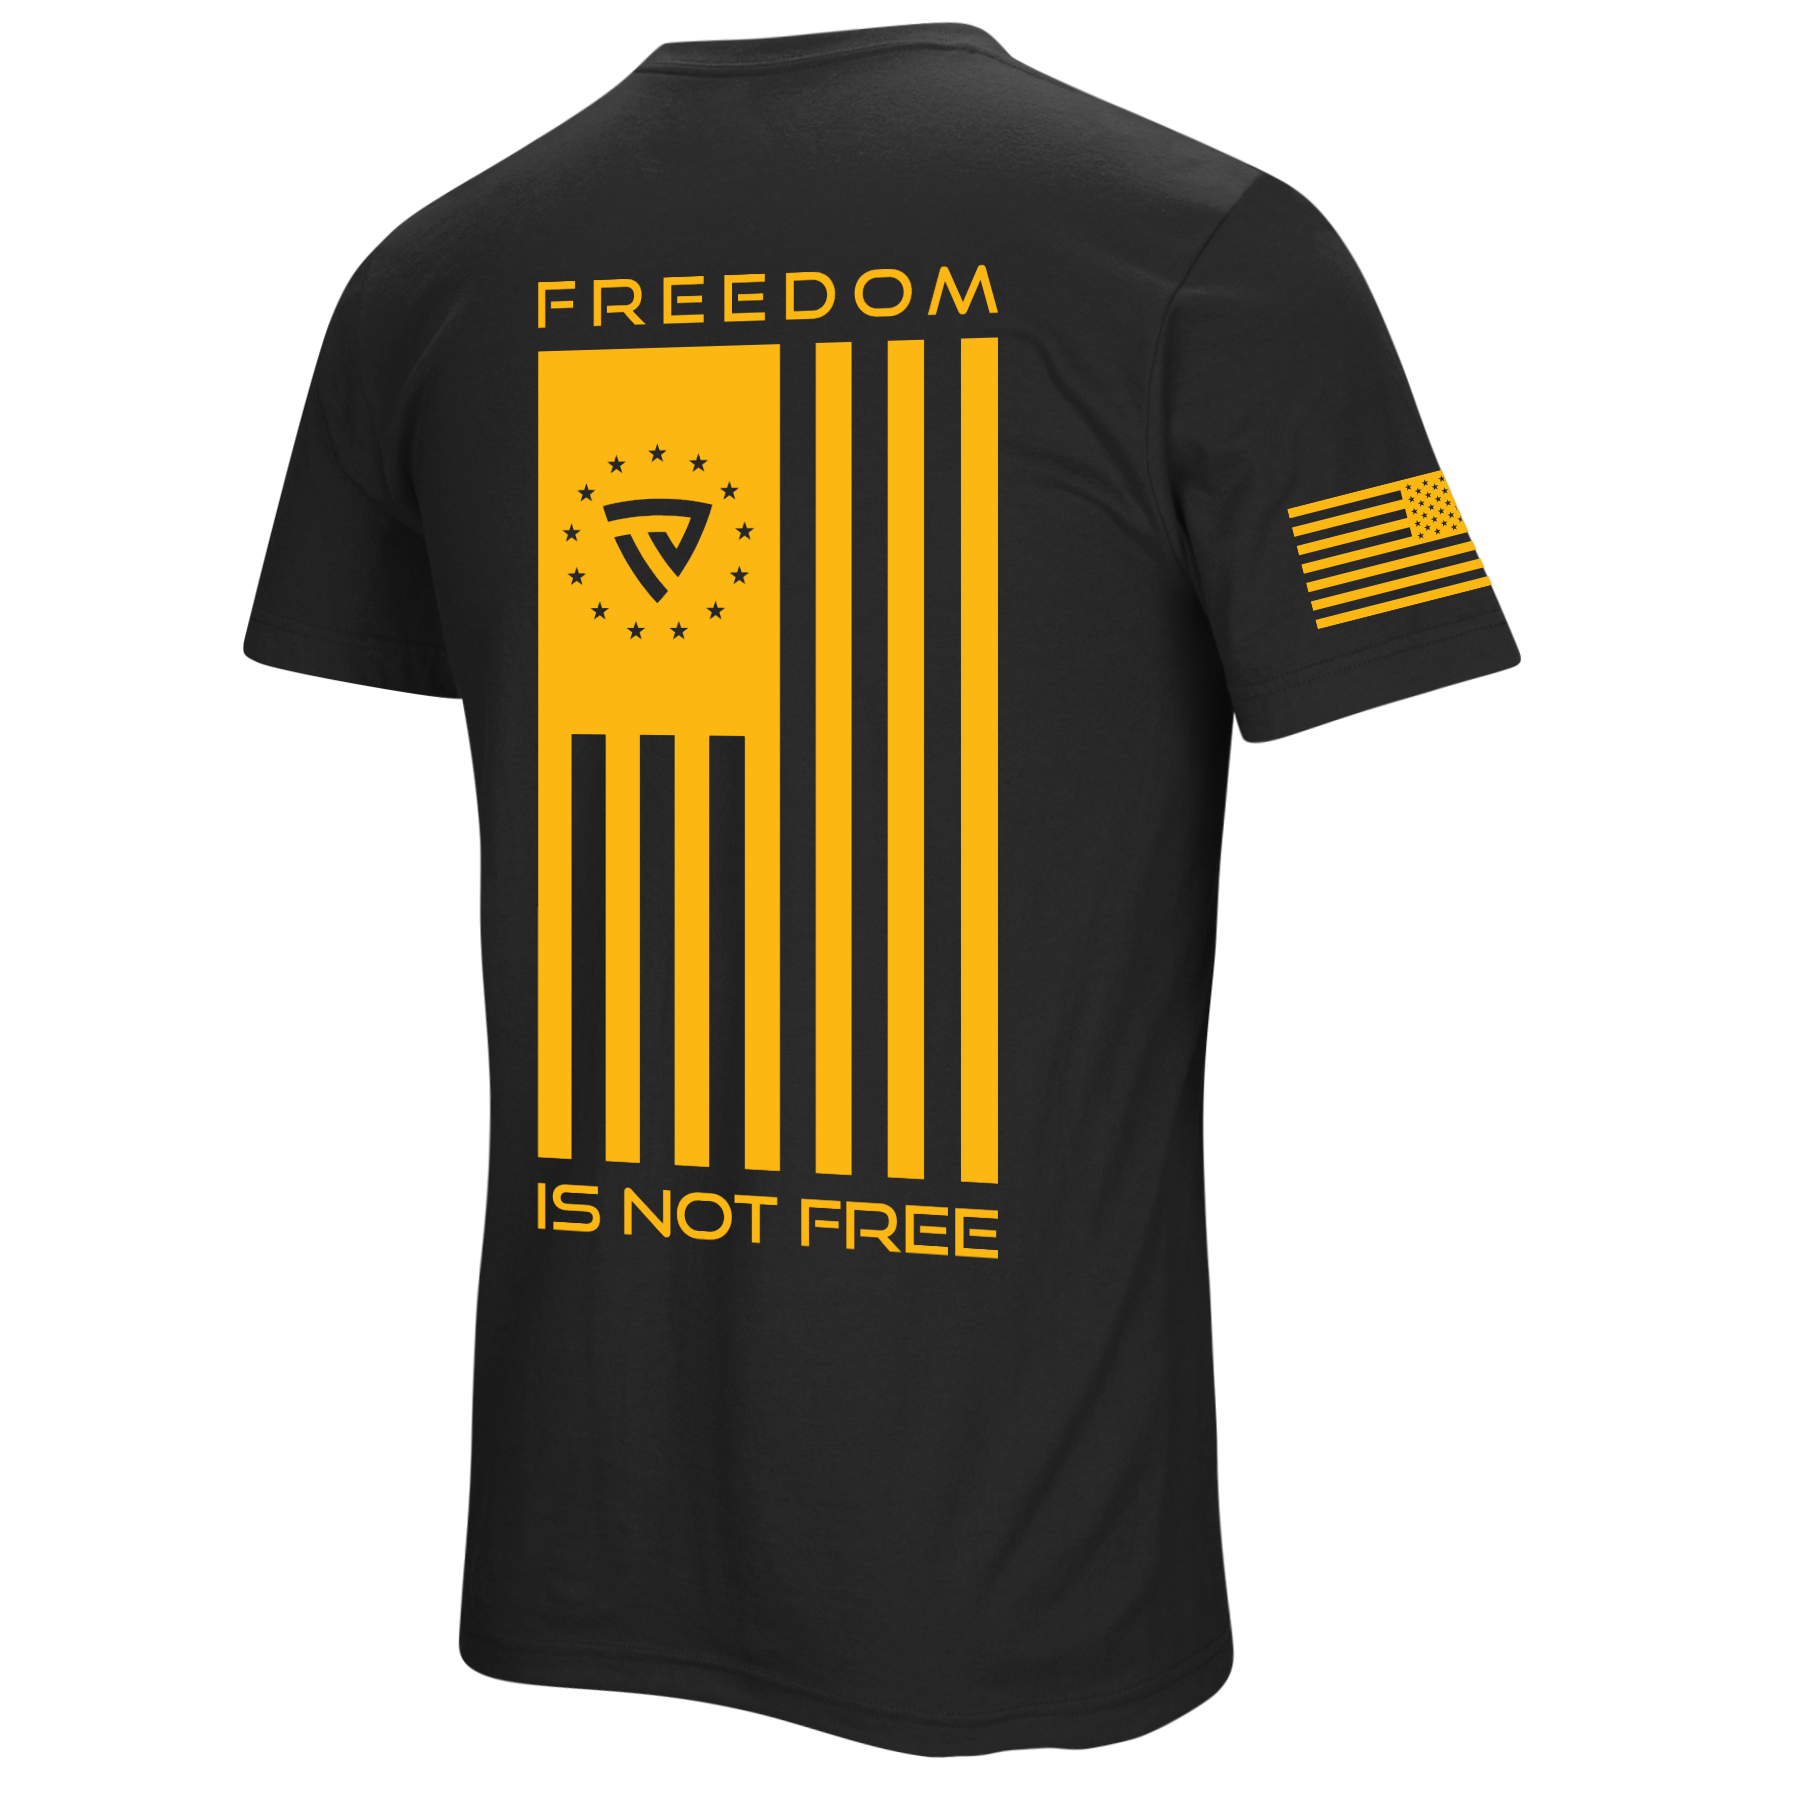 Men's Freedom Is Not Free X AB30 Tee